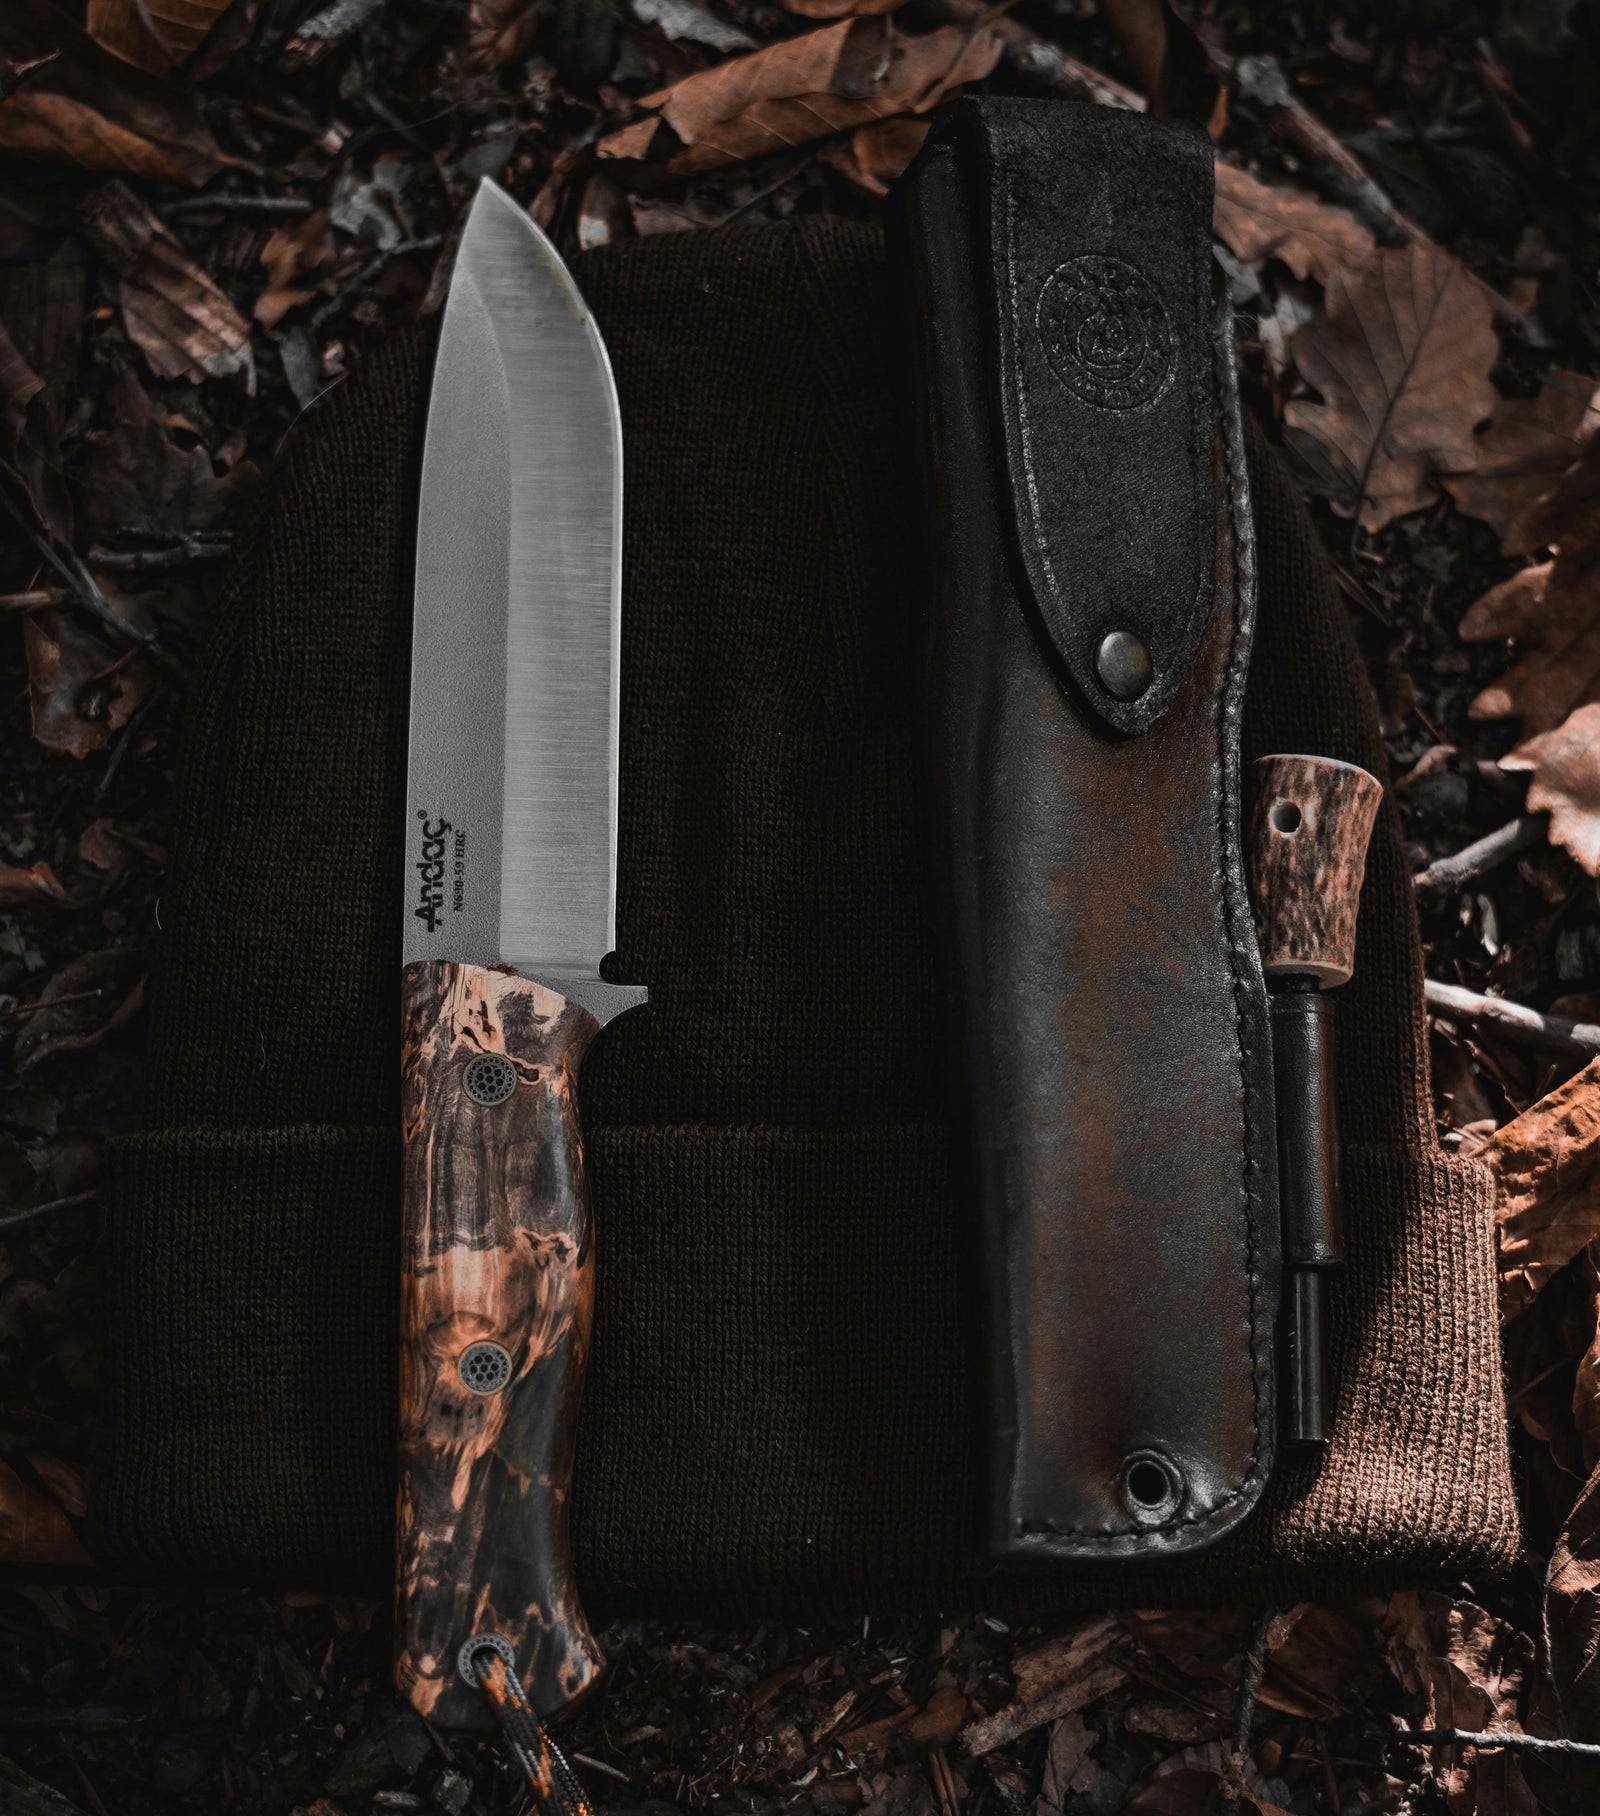 3 Uses For A Fixed Blade Knife